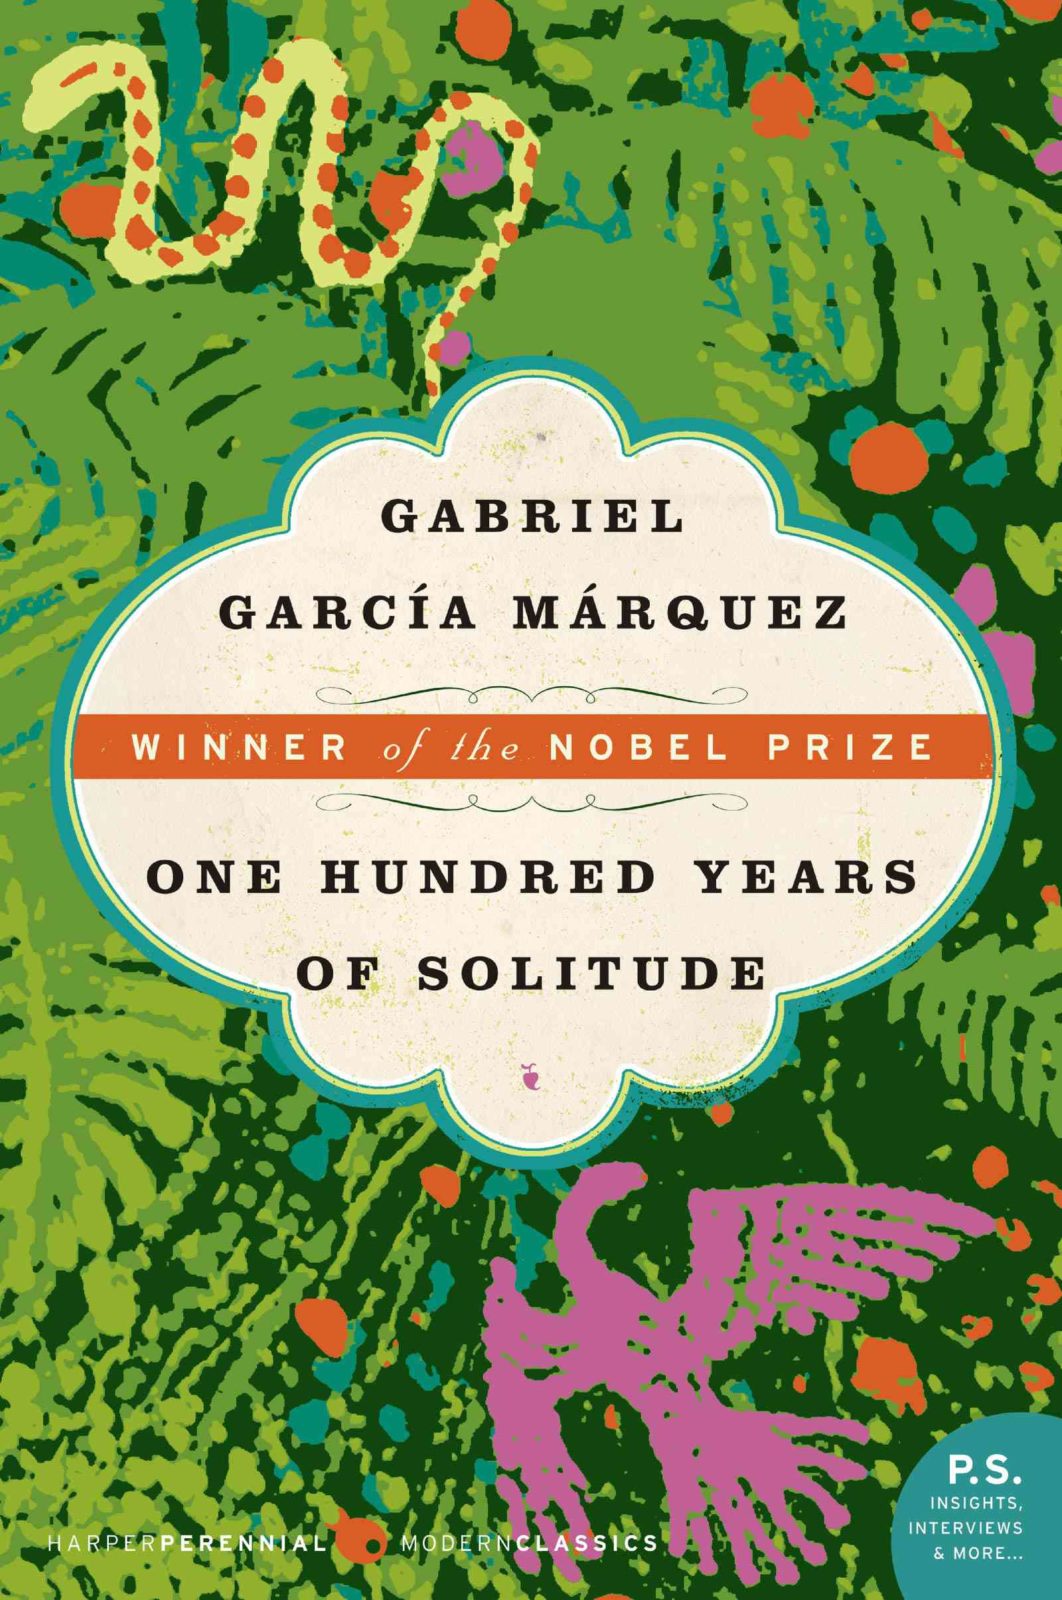 One Hundred Years Of Solitude Garcia Marquez S Masterpiece From Macondo With Samuel Rutter The Center For Fiction